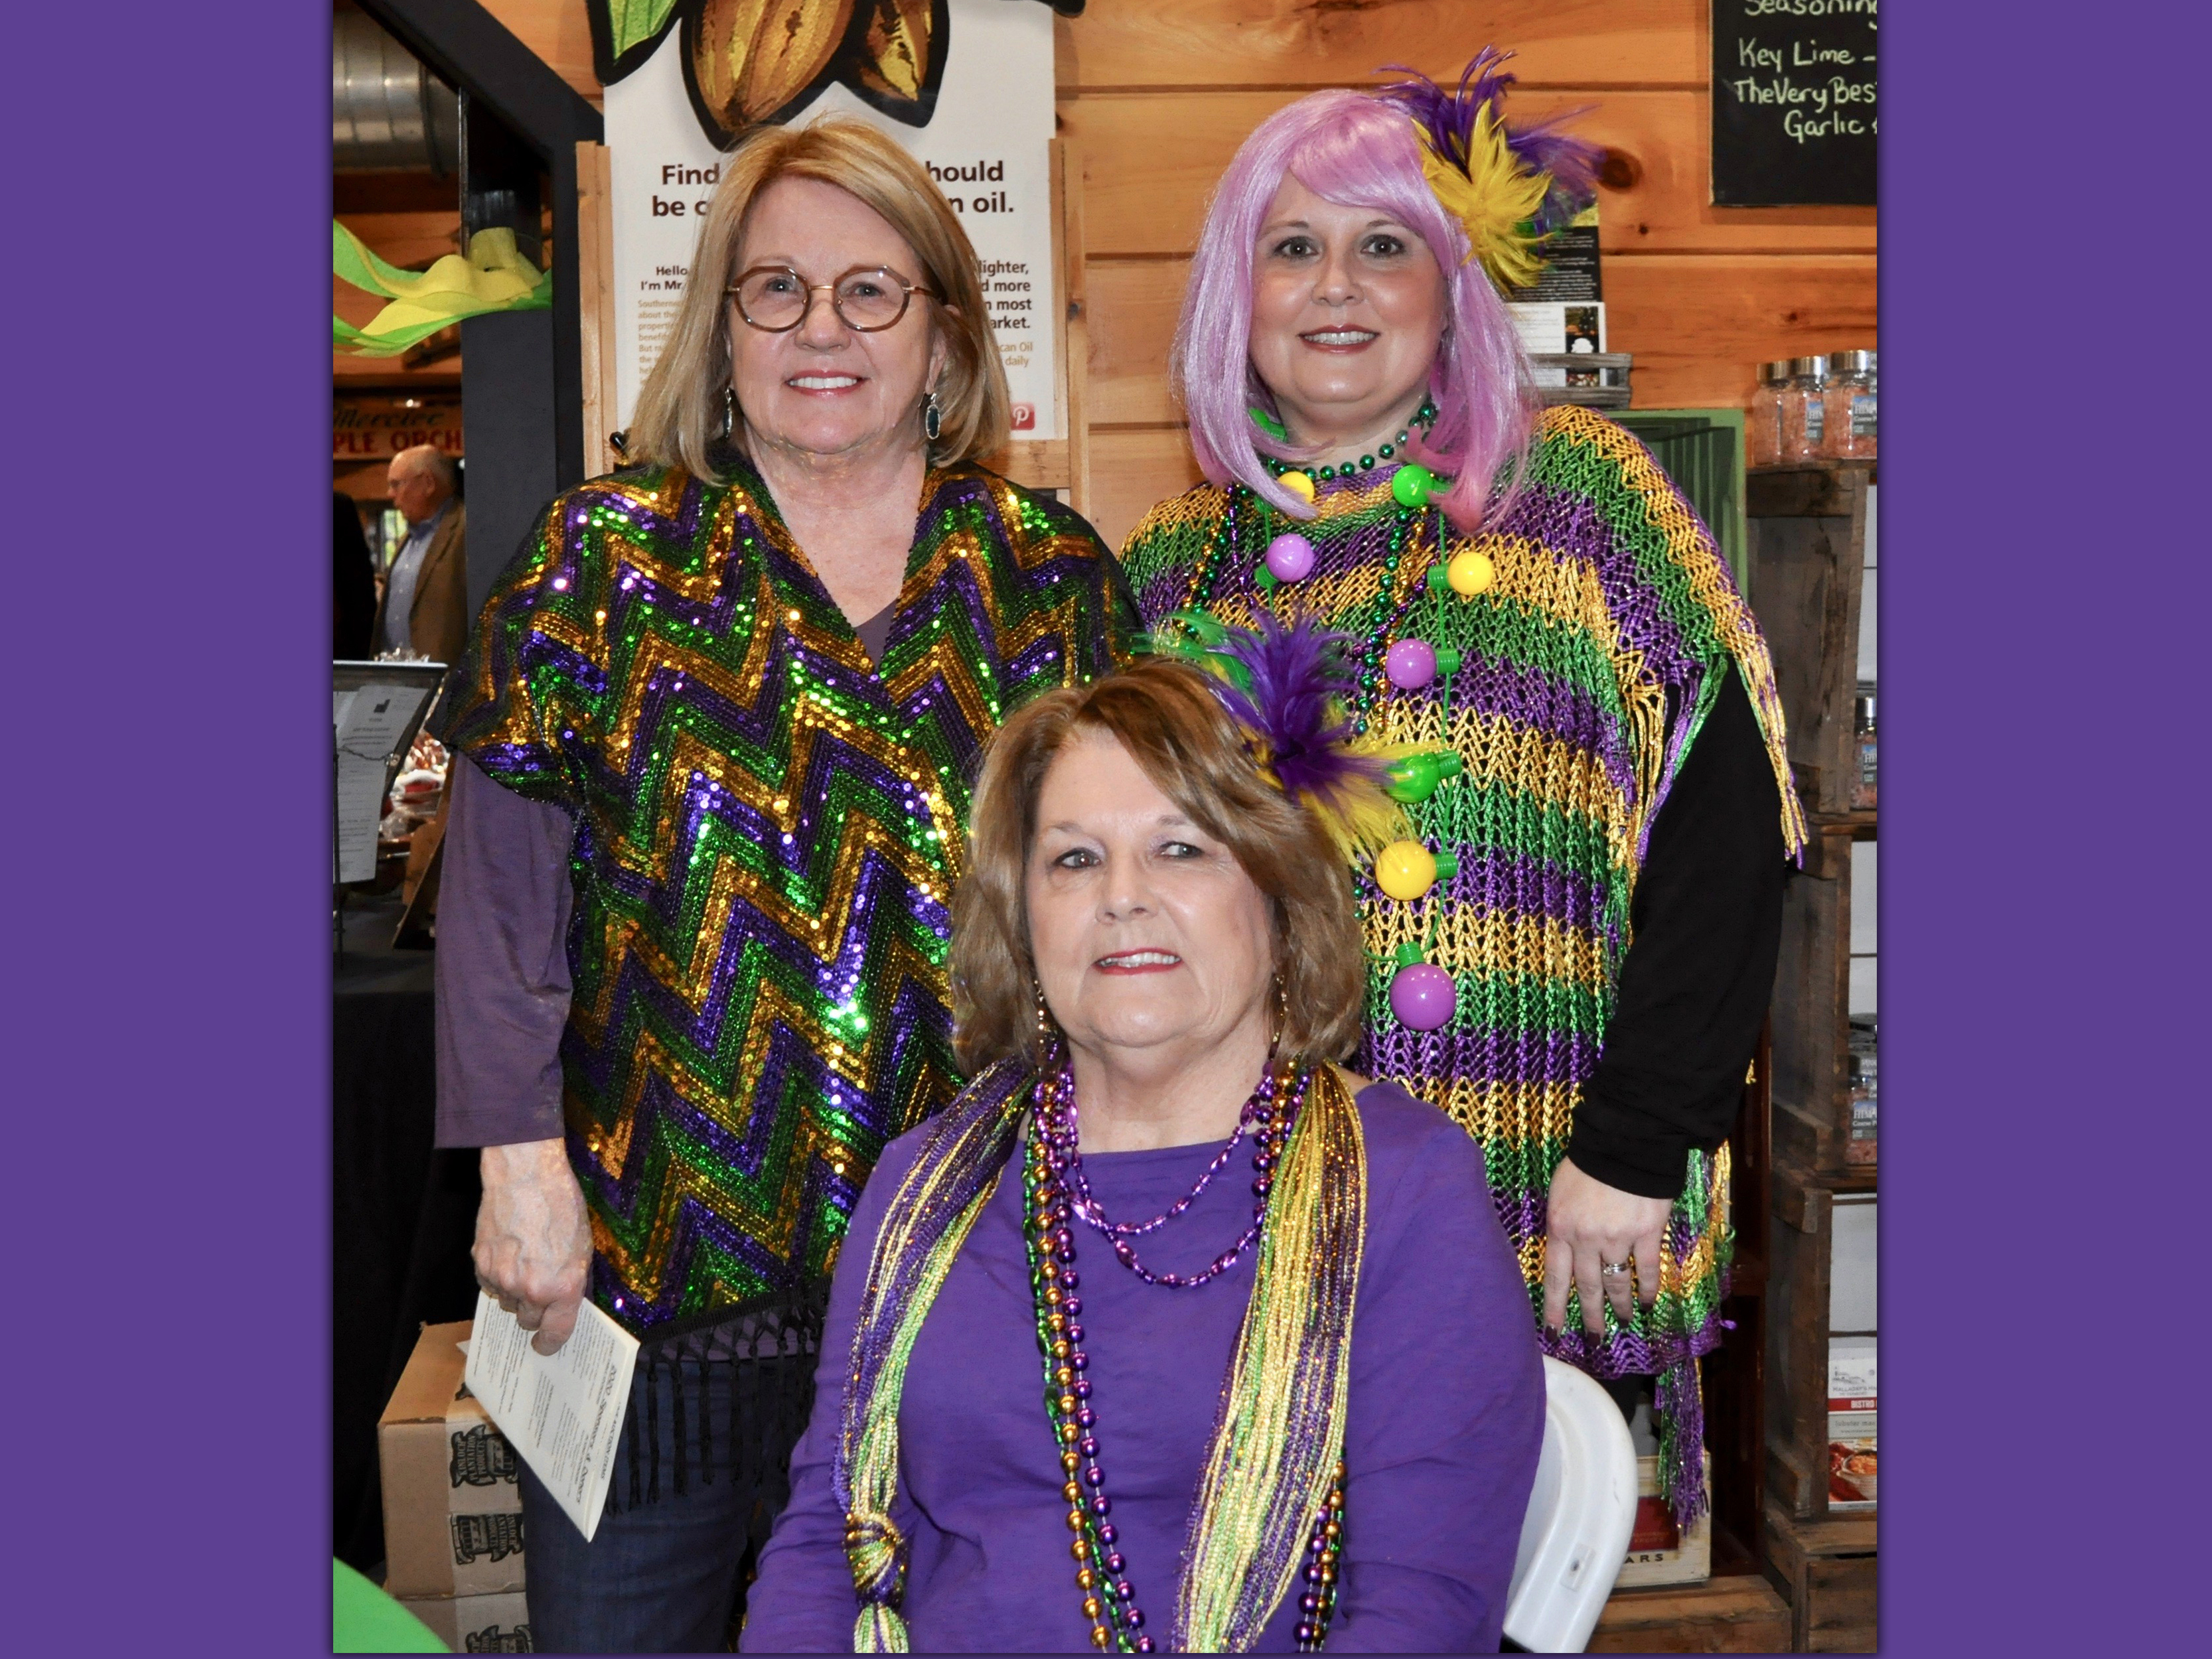 Purple, green and gold outfits were prominately displayed during Snack in a Backpack’s Mardi Gras themed fundraiser, Bringin’ the Blues to Blue Ridge, Saturday, February 22. Shown are, from left, Jeanie Morris, Margie Smith and Stephanie Danuser.